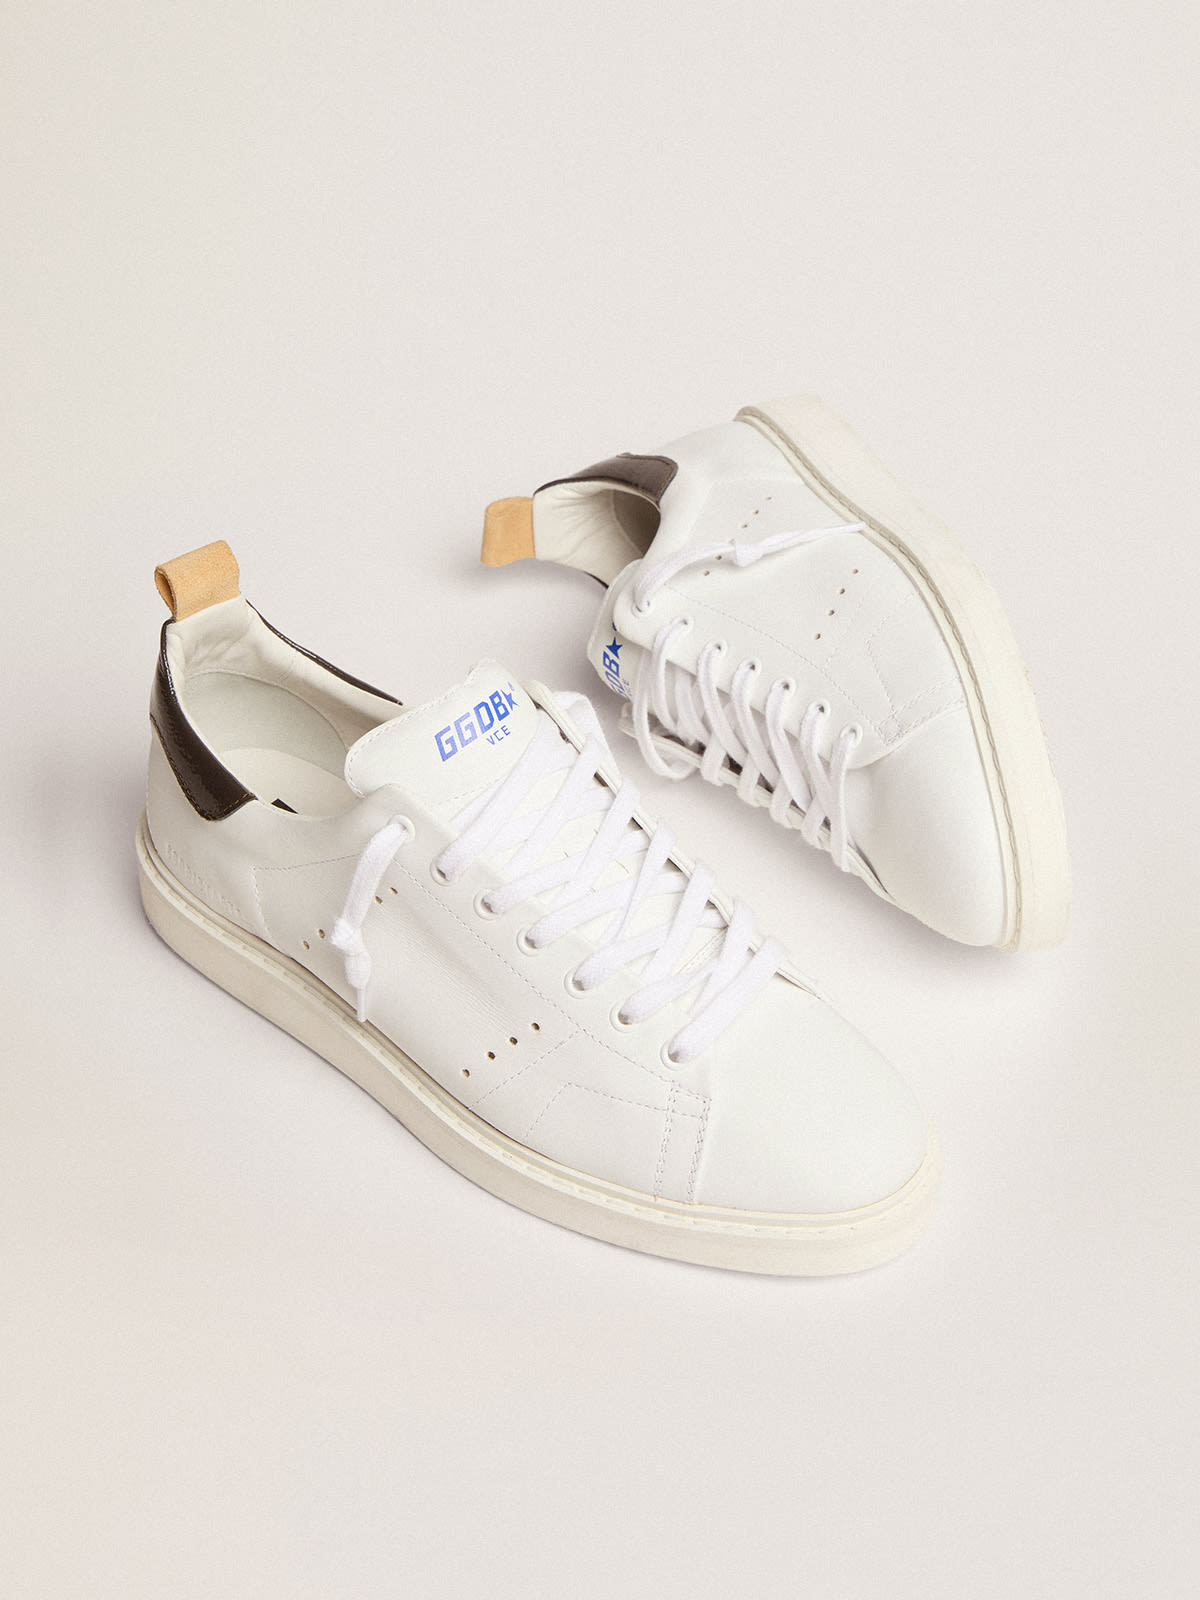 Golden Goose - Starter sneakers in white naplak with gray patent leather heel tab in 